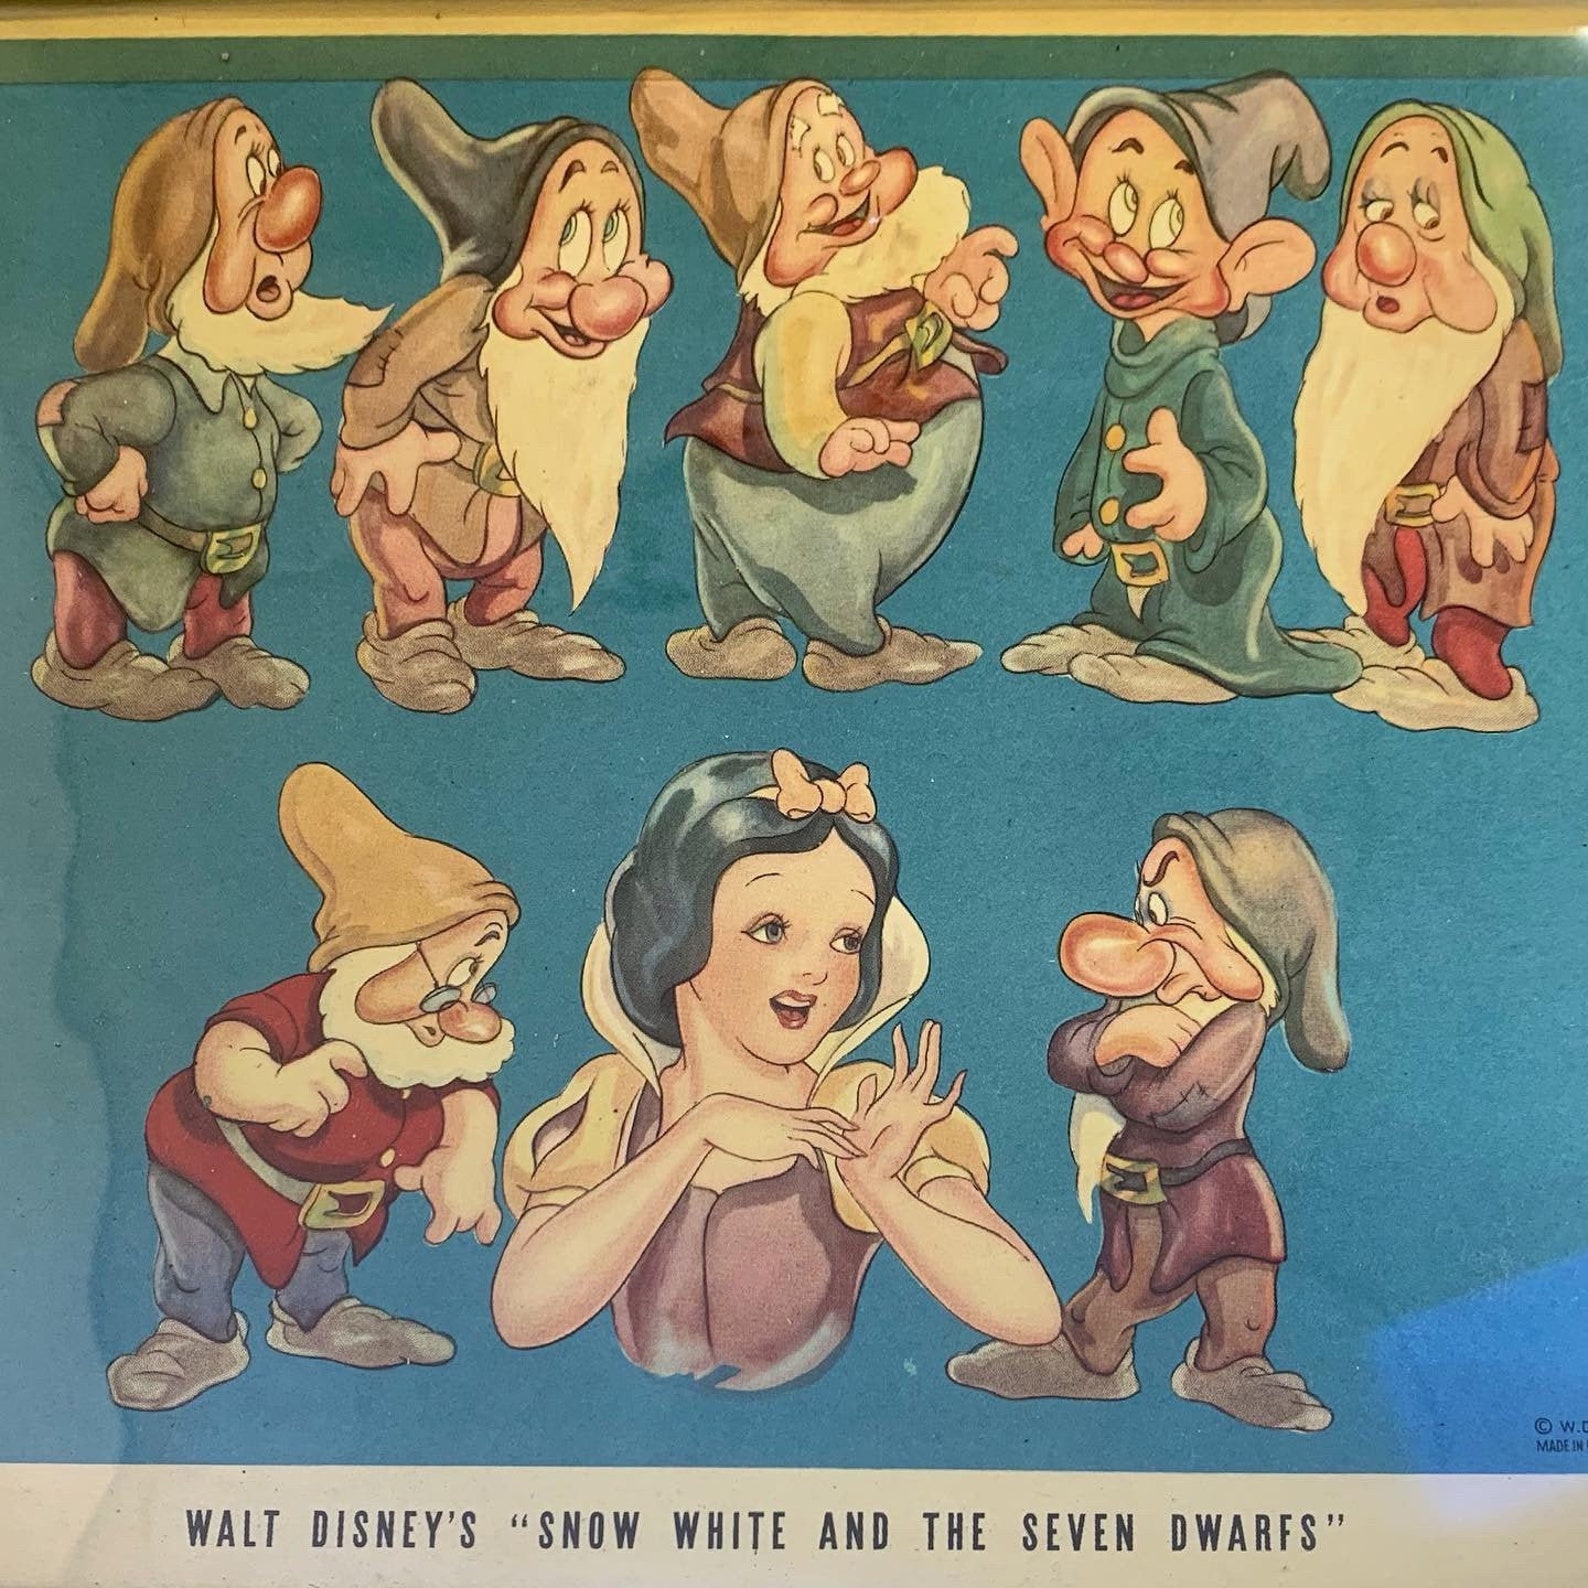 Snow White and the Seven Dwarfs Paper Dolls image 0.